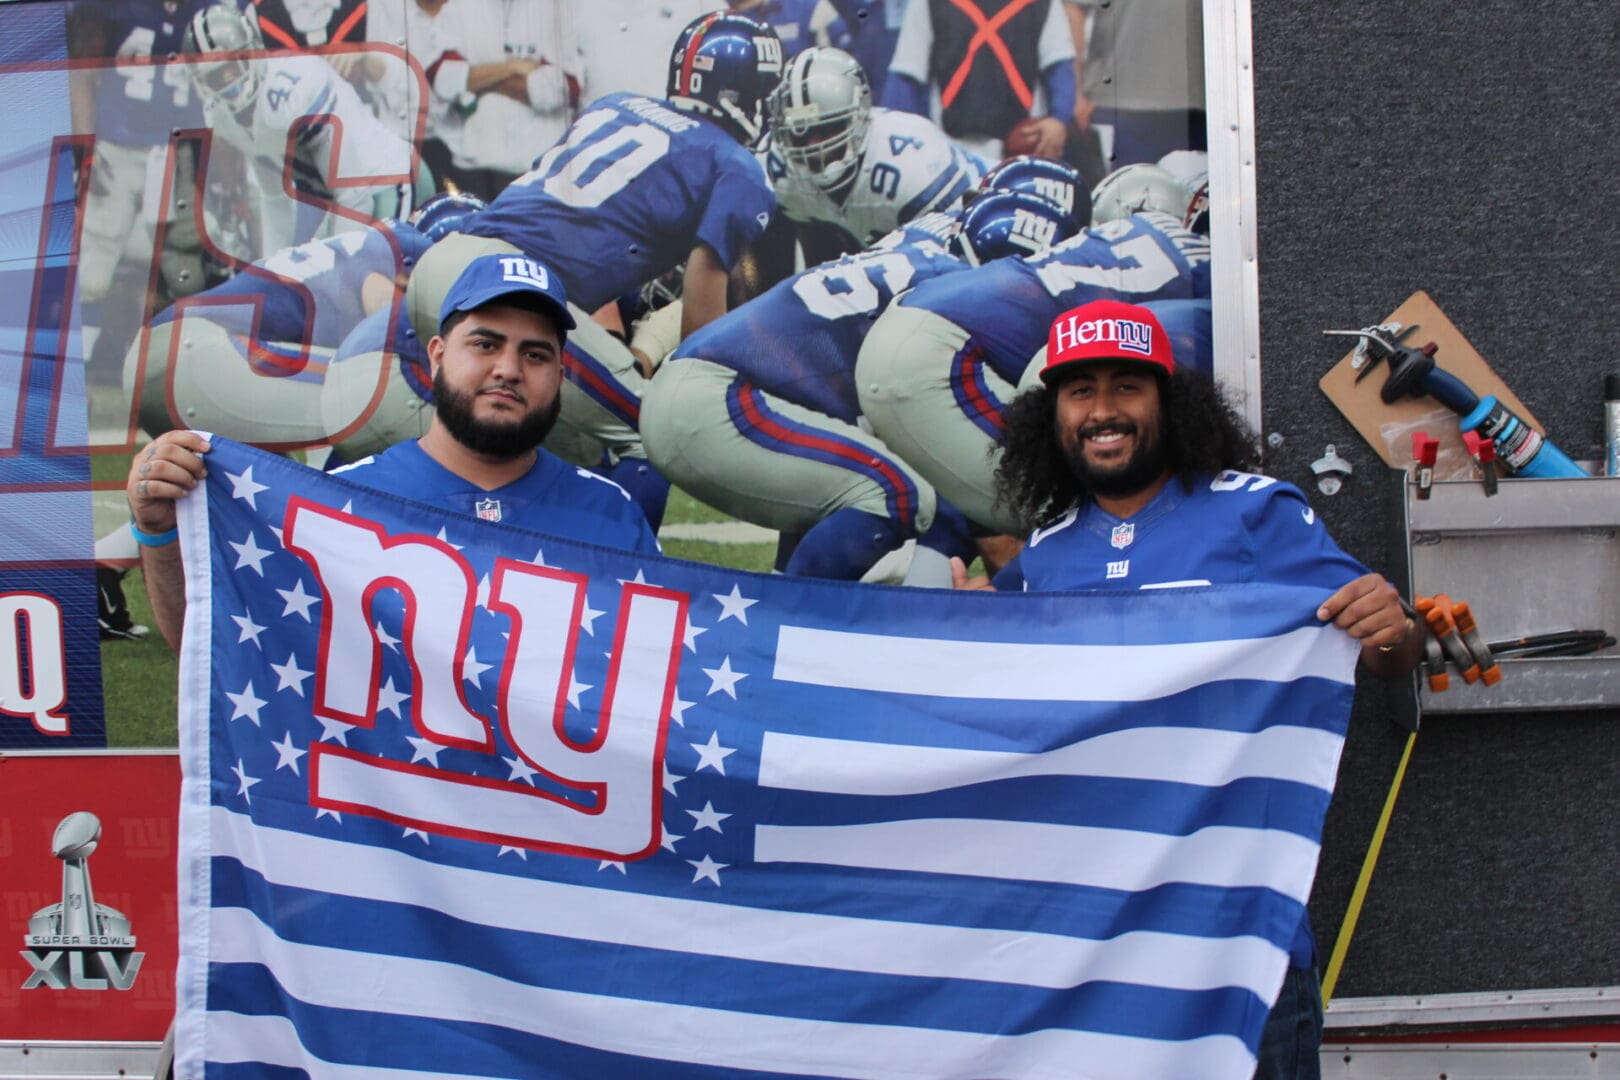 Two men holding a flag in front of an image of the nfl.